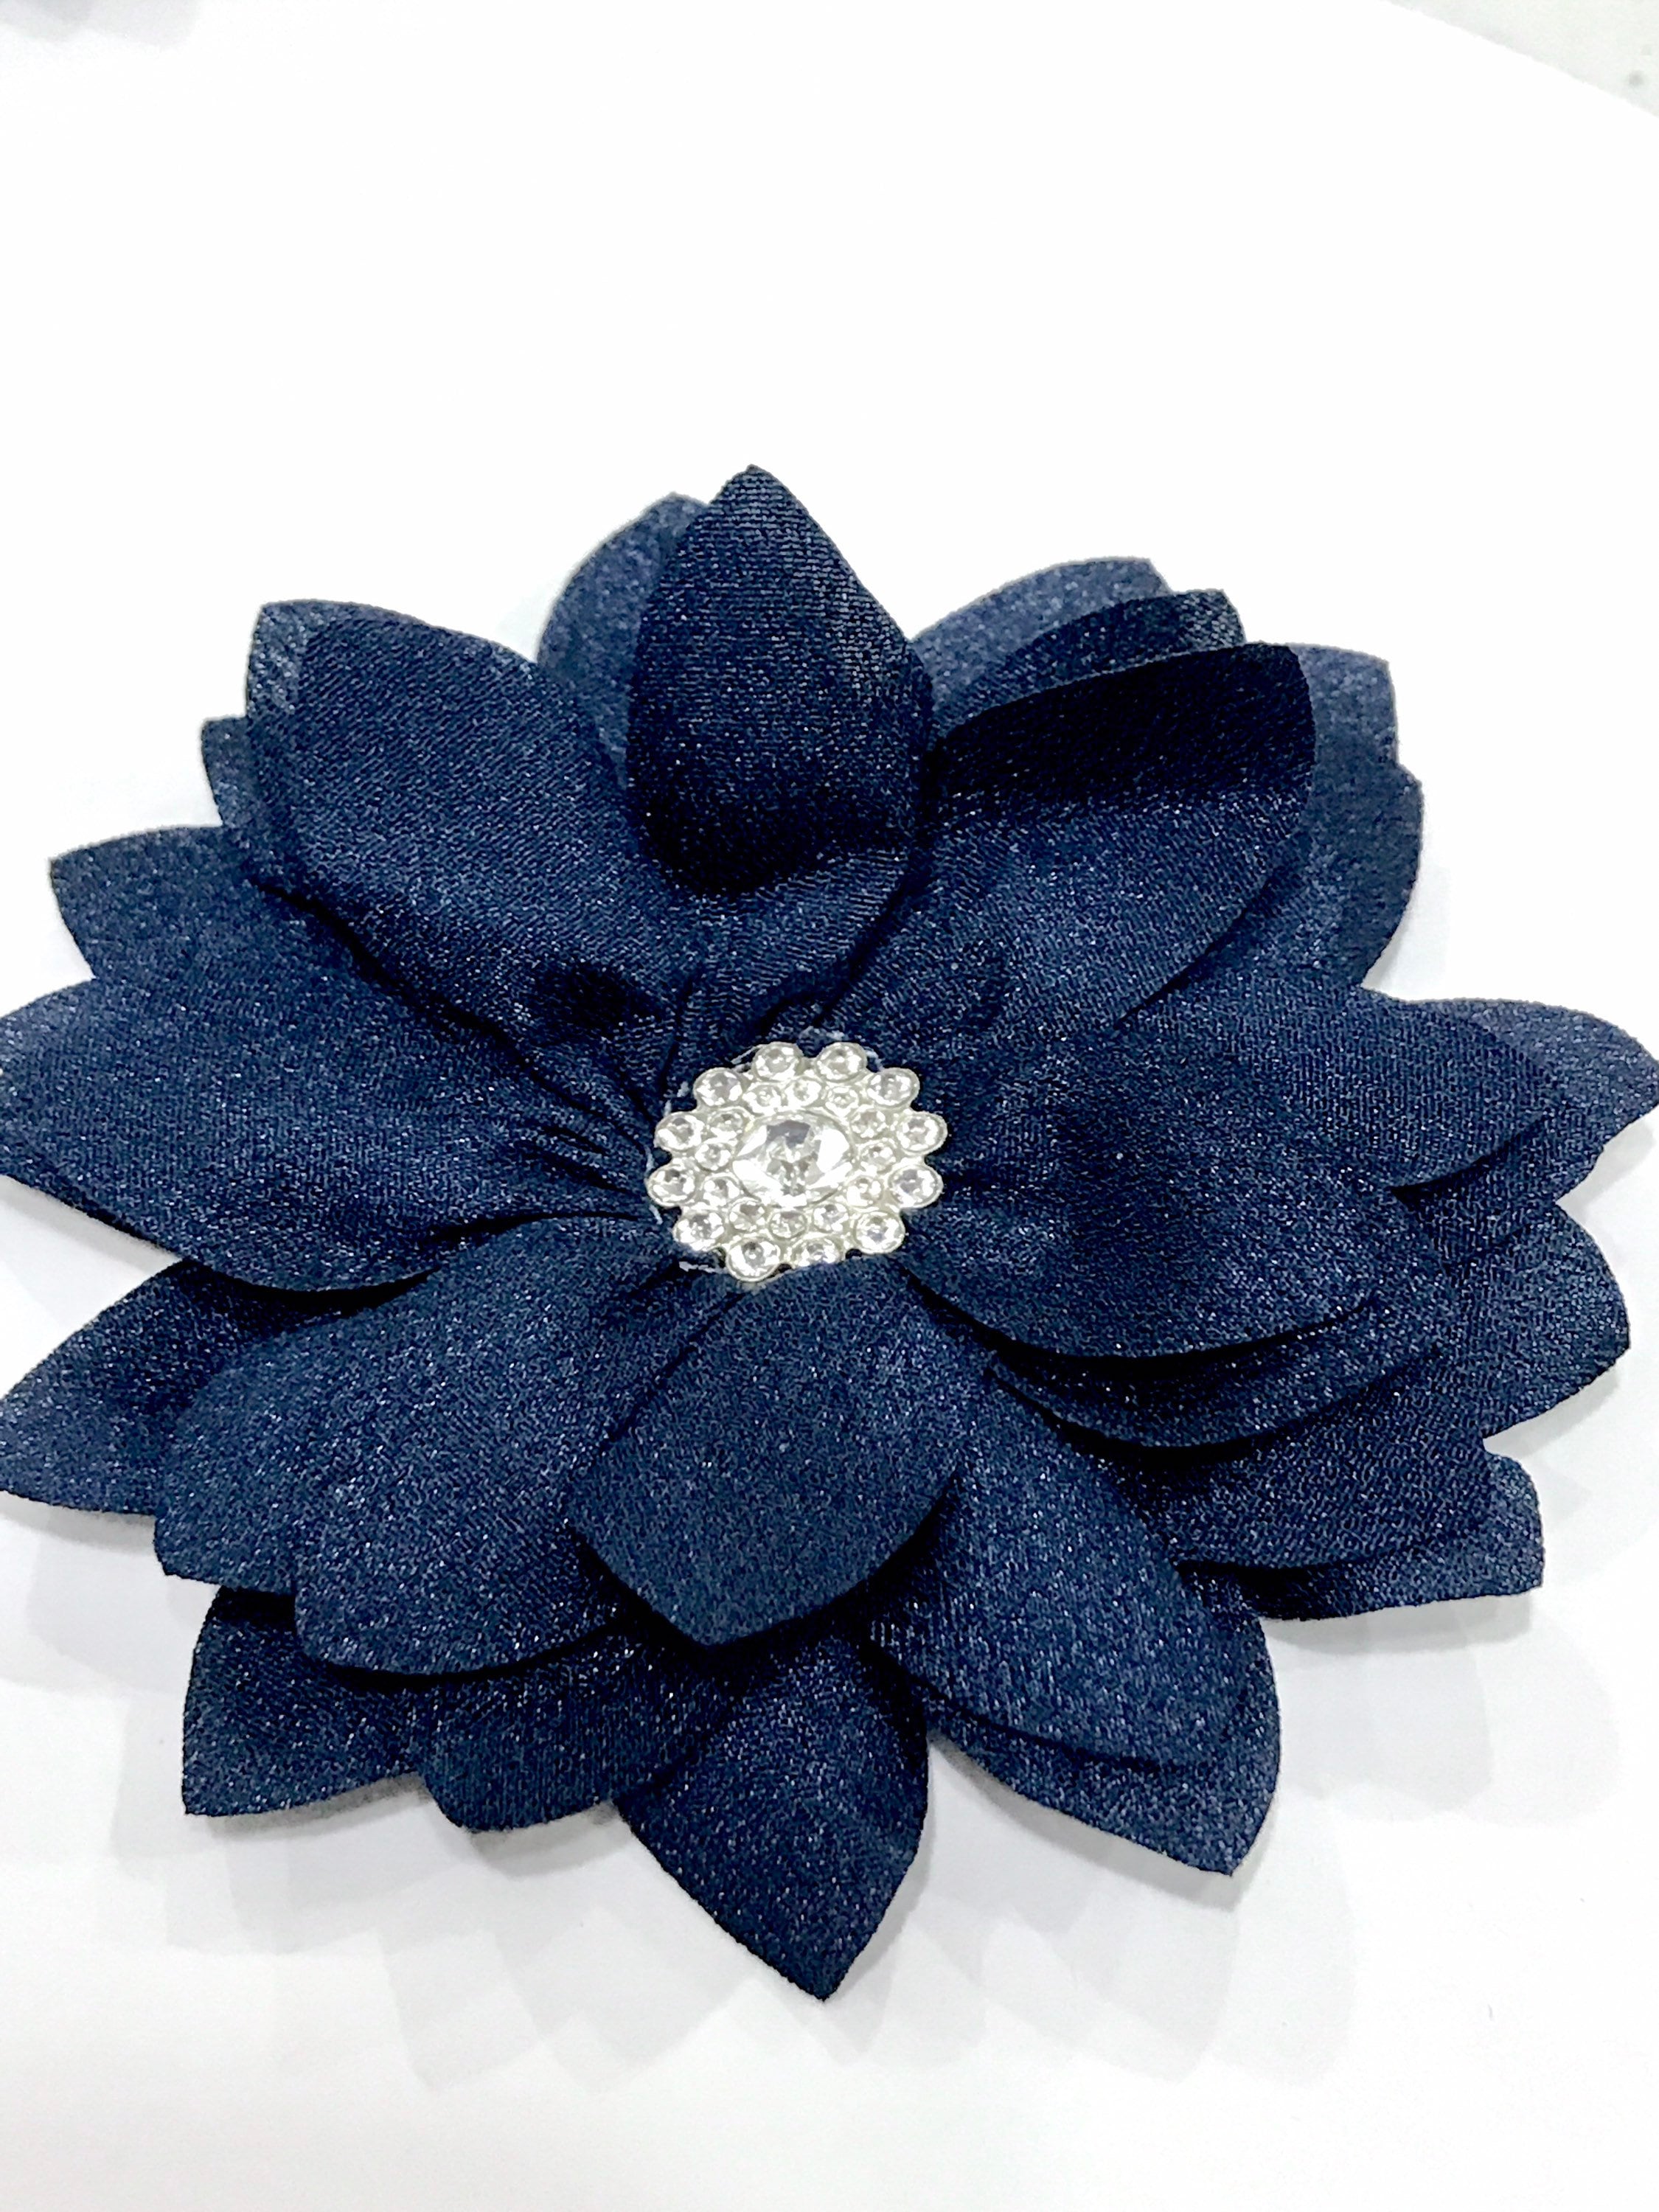 Fabric Flower Navy Blue Chiffon Flower Wholesale Navy Flower Wedding Flower Navy Blue Chiffon Flower with Pearls for Headband